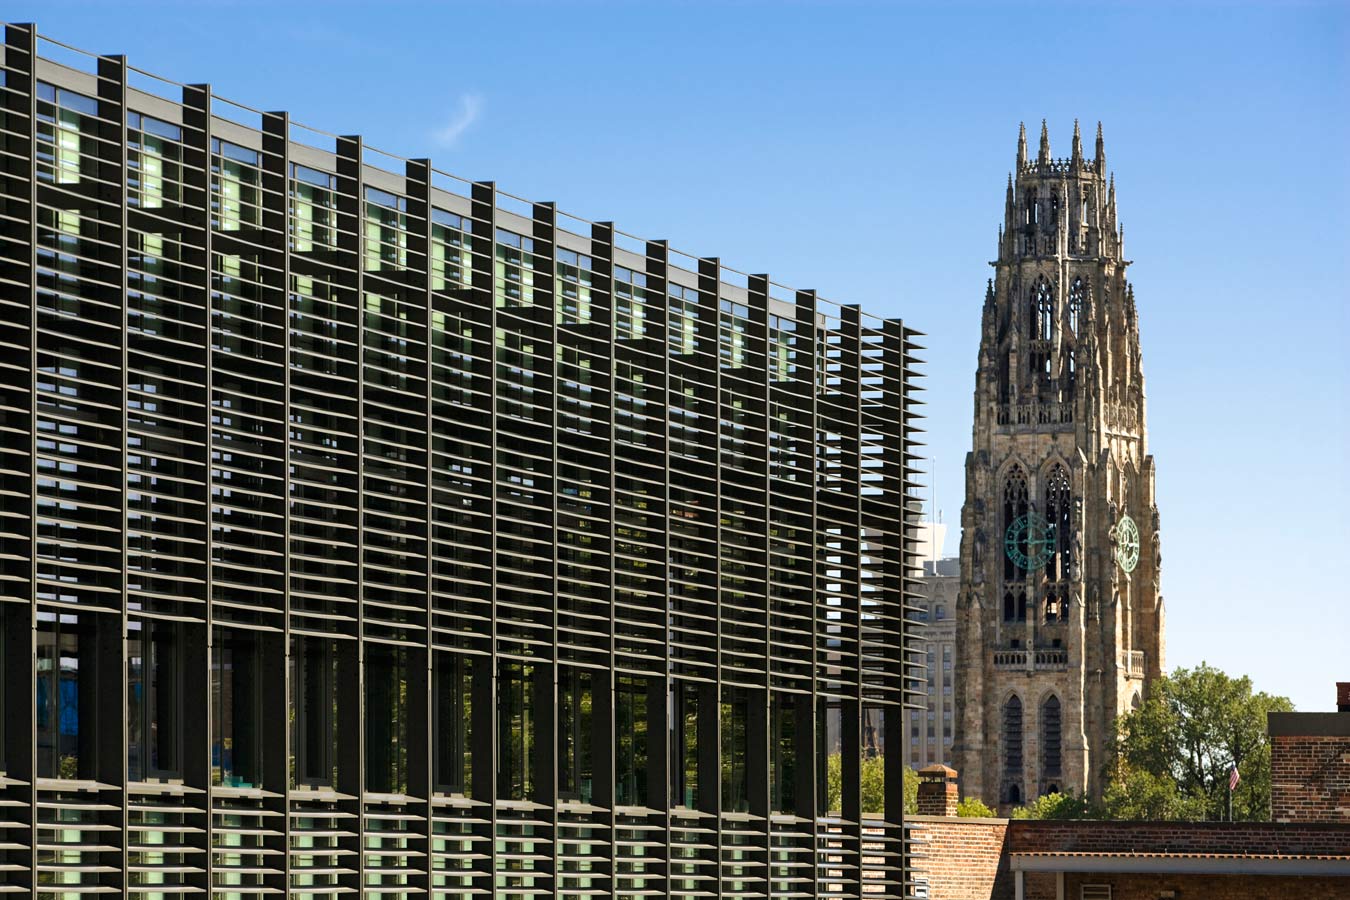 <p>The high-performance envelope of the sculpture building, designed to mitigate solar gain, creates the effect of an elegant contemporary gothic fenestration as seen against Yale's gothic structures beyond. <br><small>&copy; Peter Aaron/OTTO</small></p>